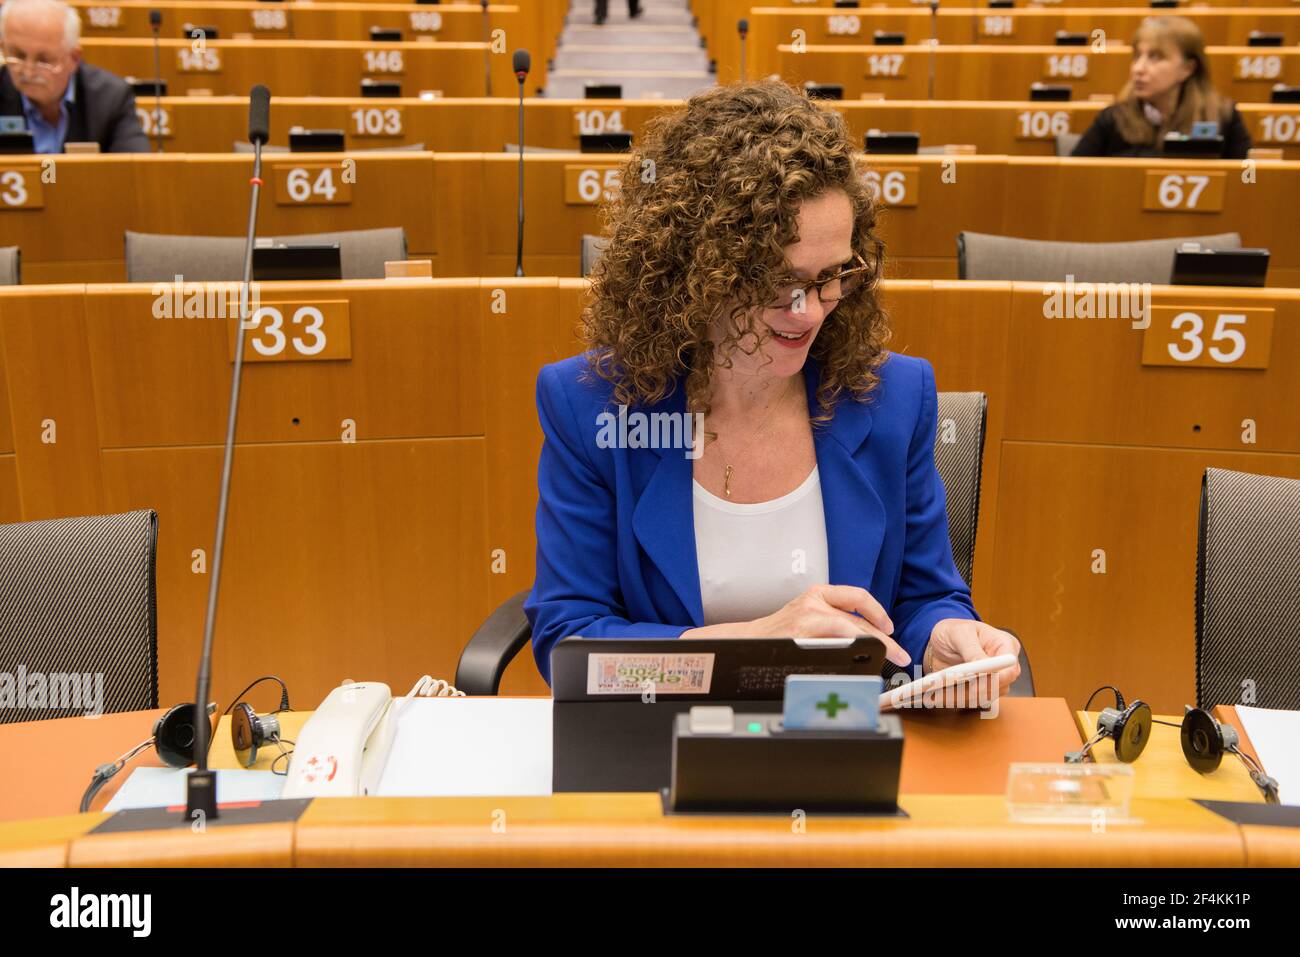 Brussels, Belgium. Member of European Parliament, Mrs. Sofia in 't Veld in her seat, checking the messages on her smartphone. Stock Photo